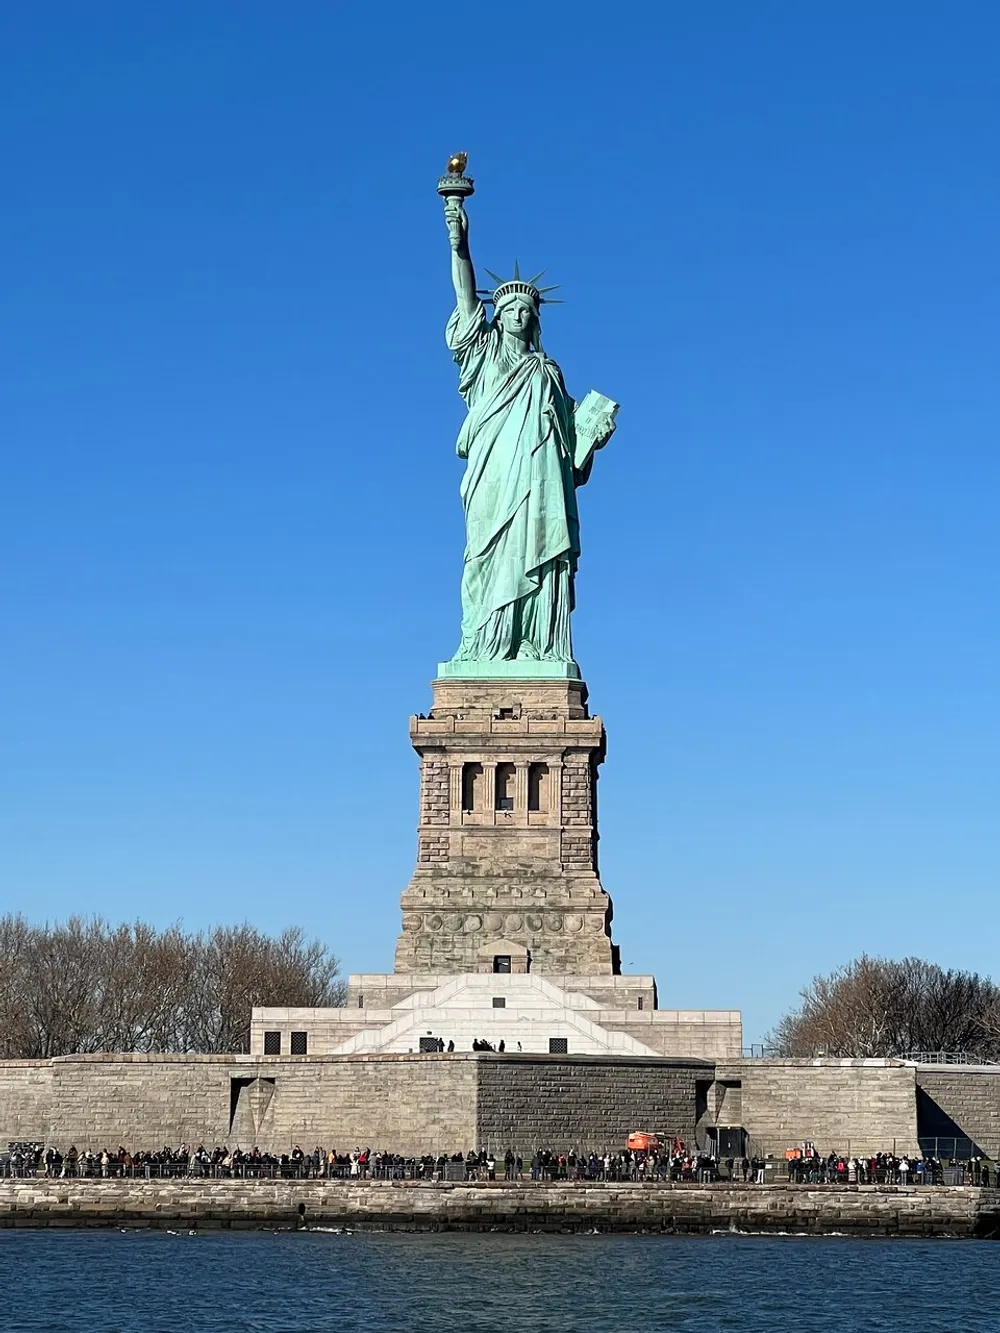 The Statue of Liberty stands tall against a clear blue sky as visitors gather around its pedestal on Liberty Island